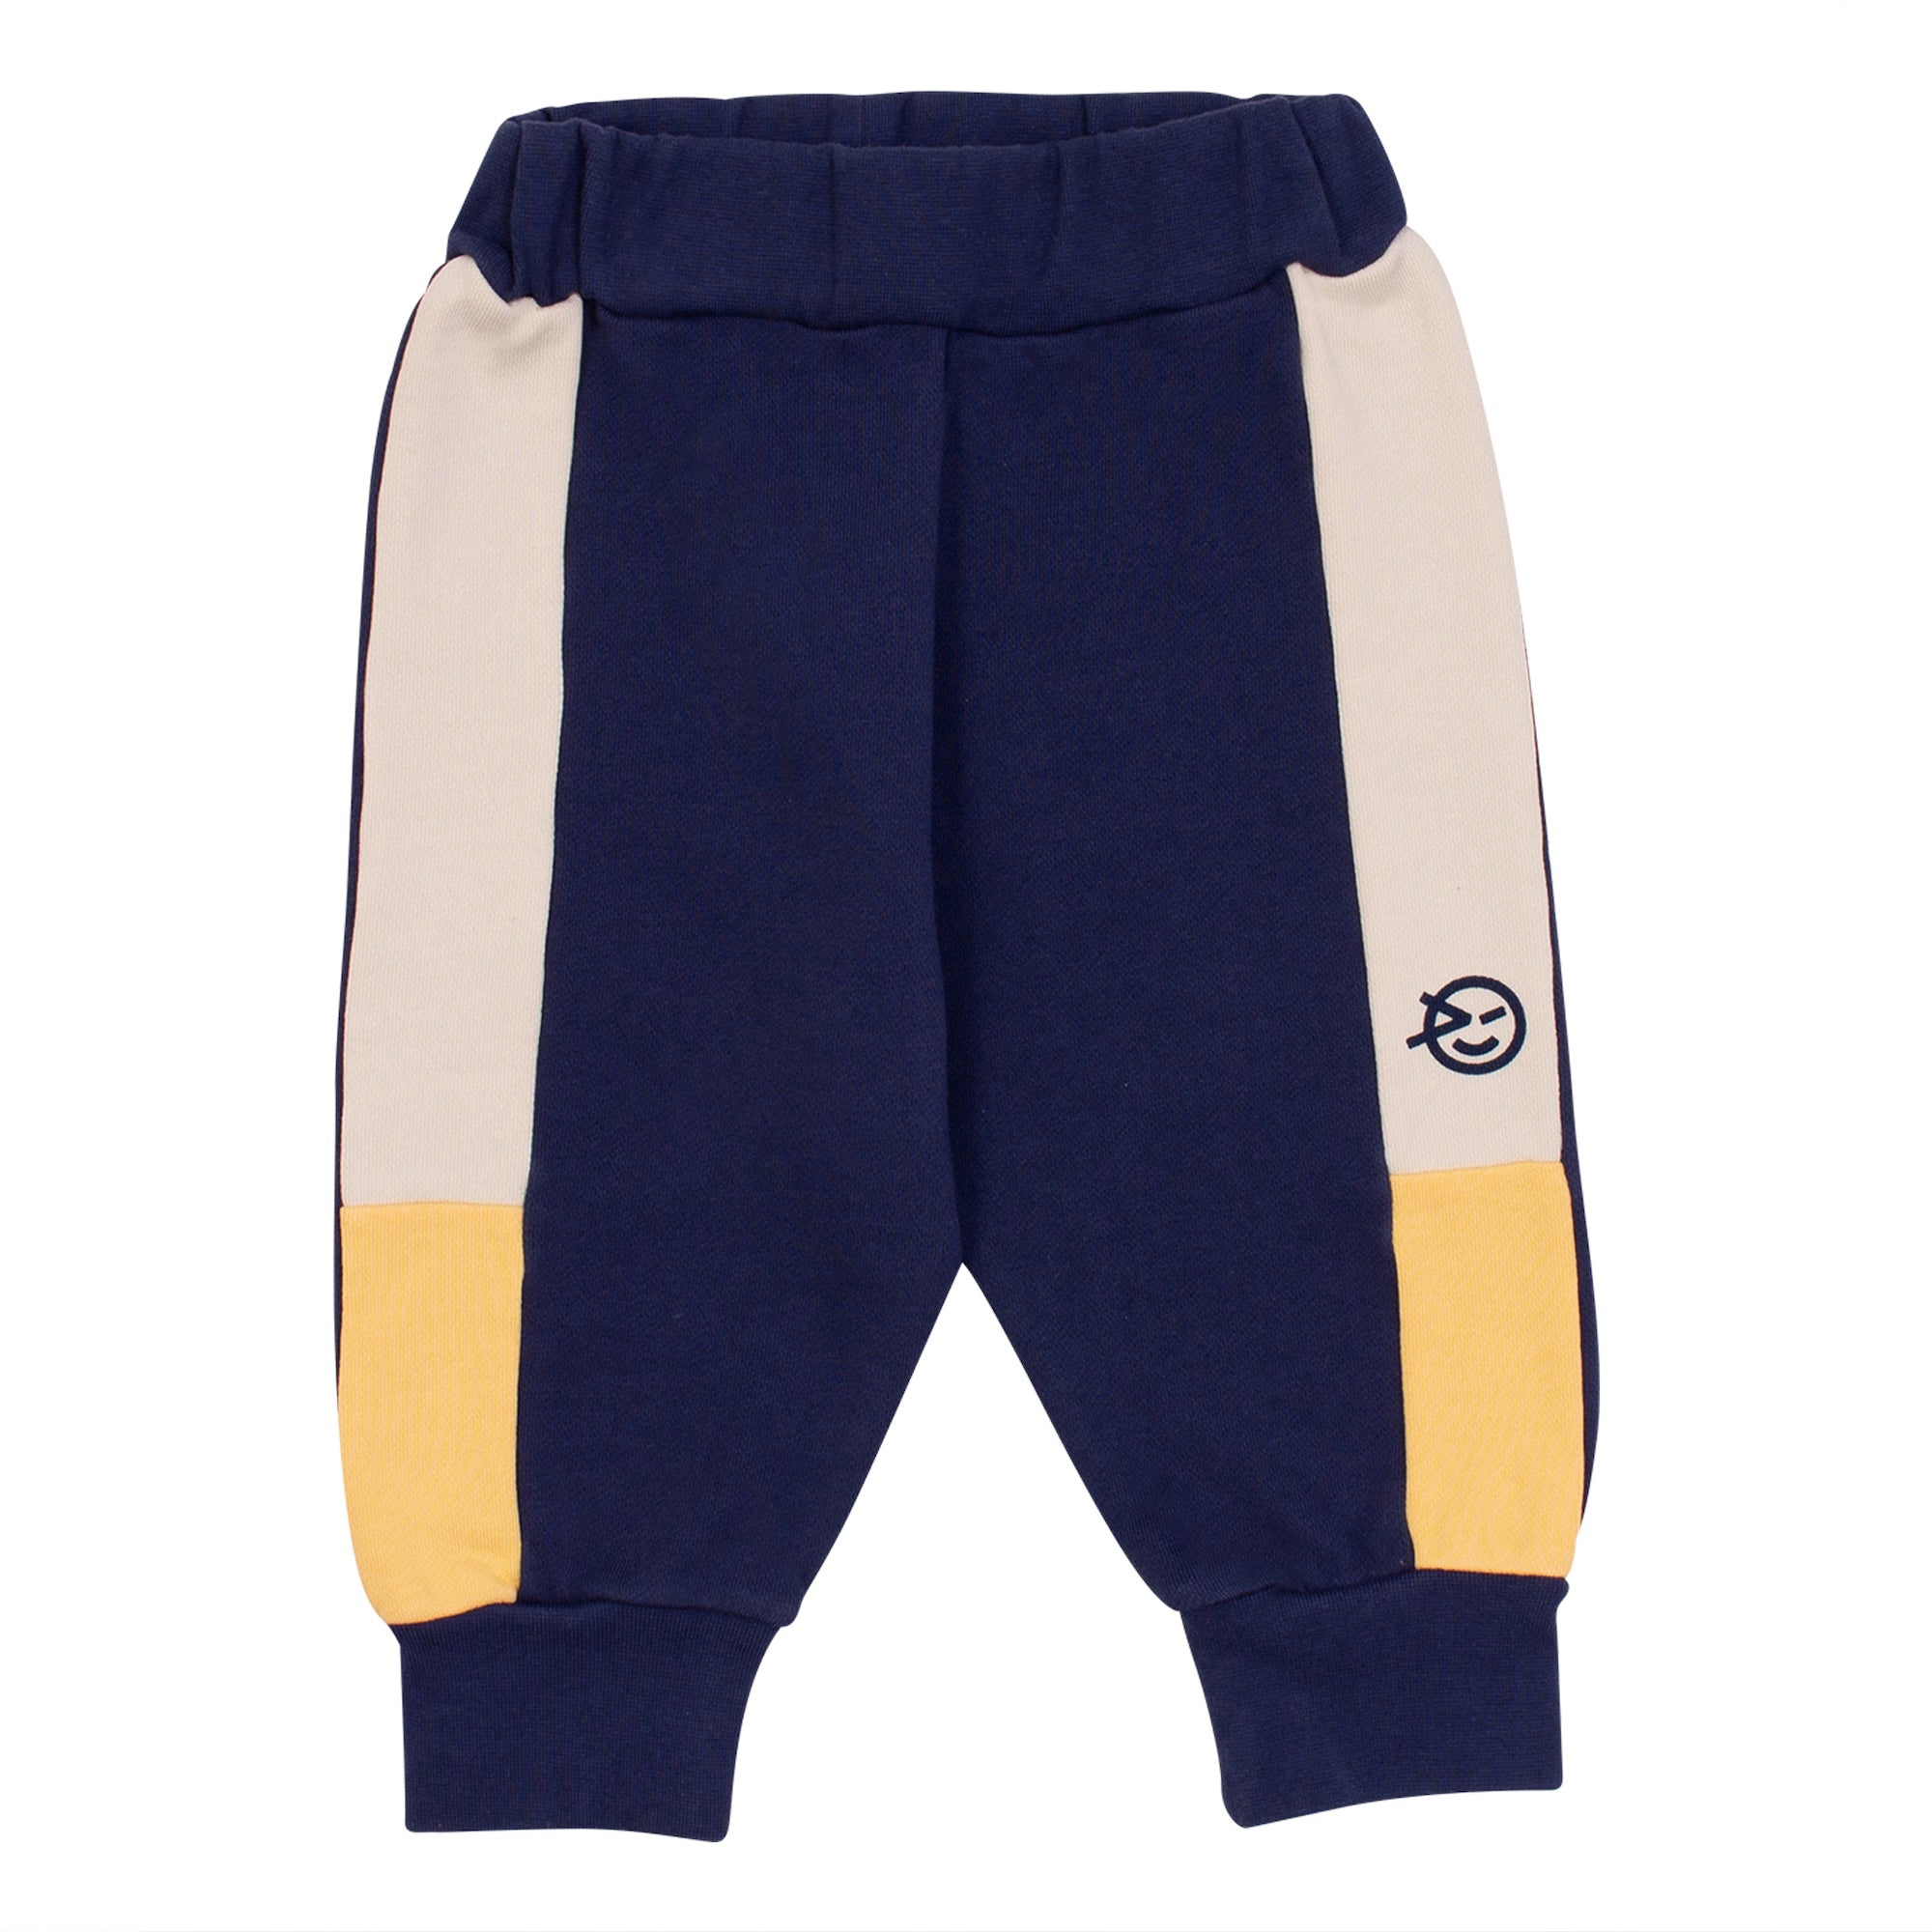 Baby Sail Track Pant - Navy/Pale Egg